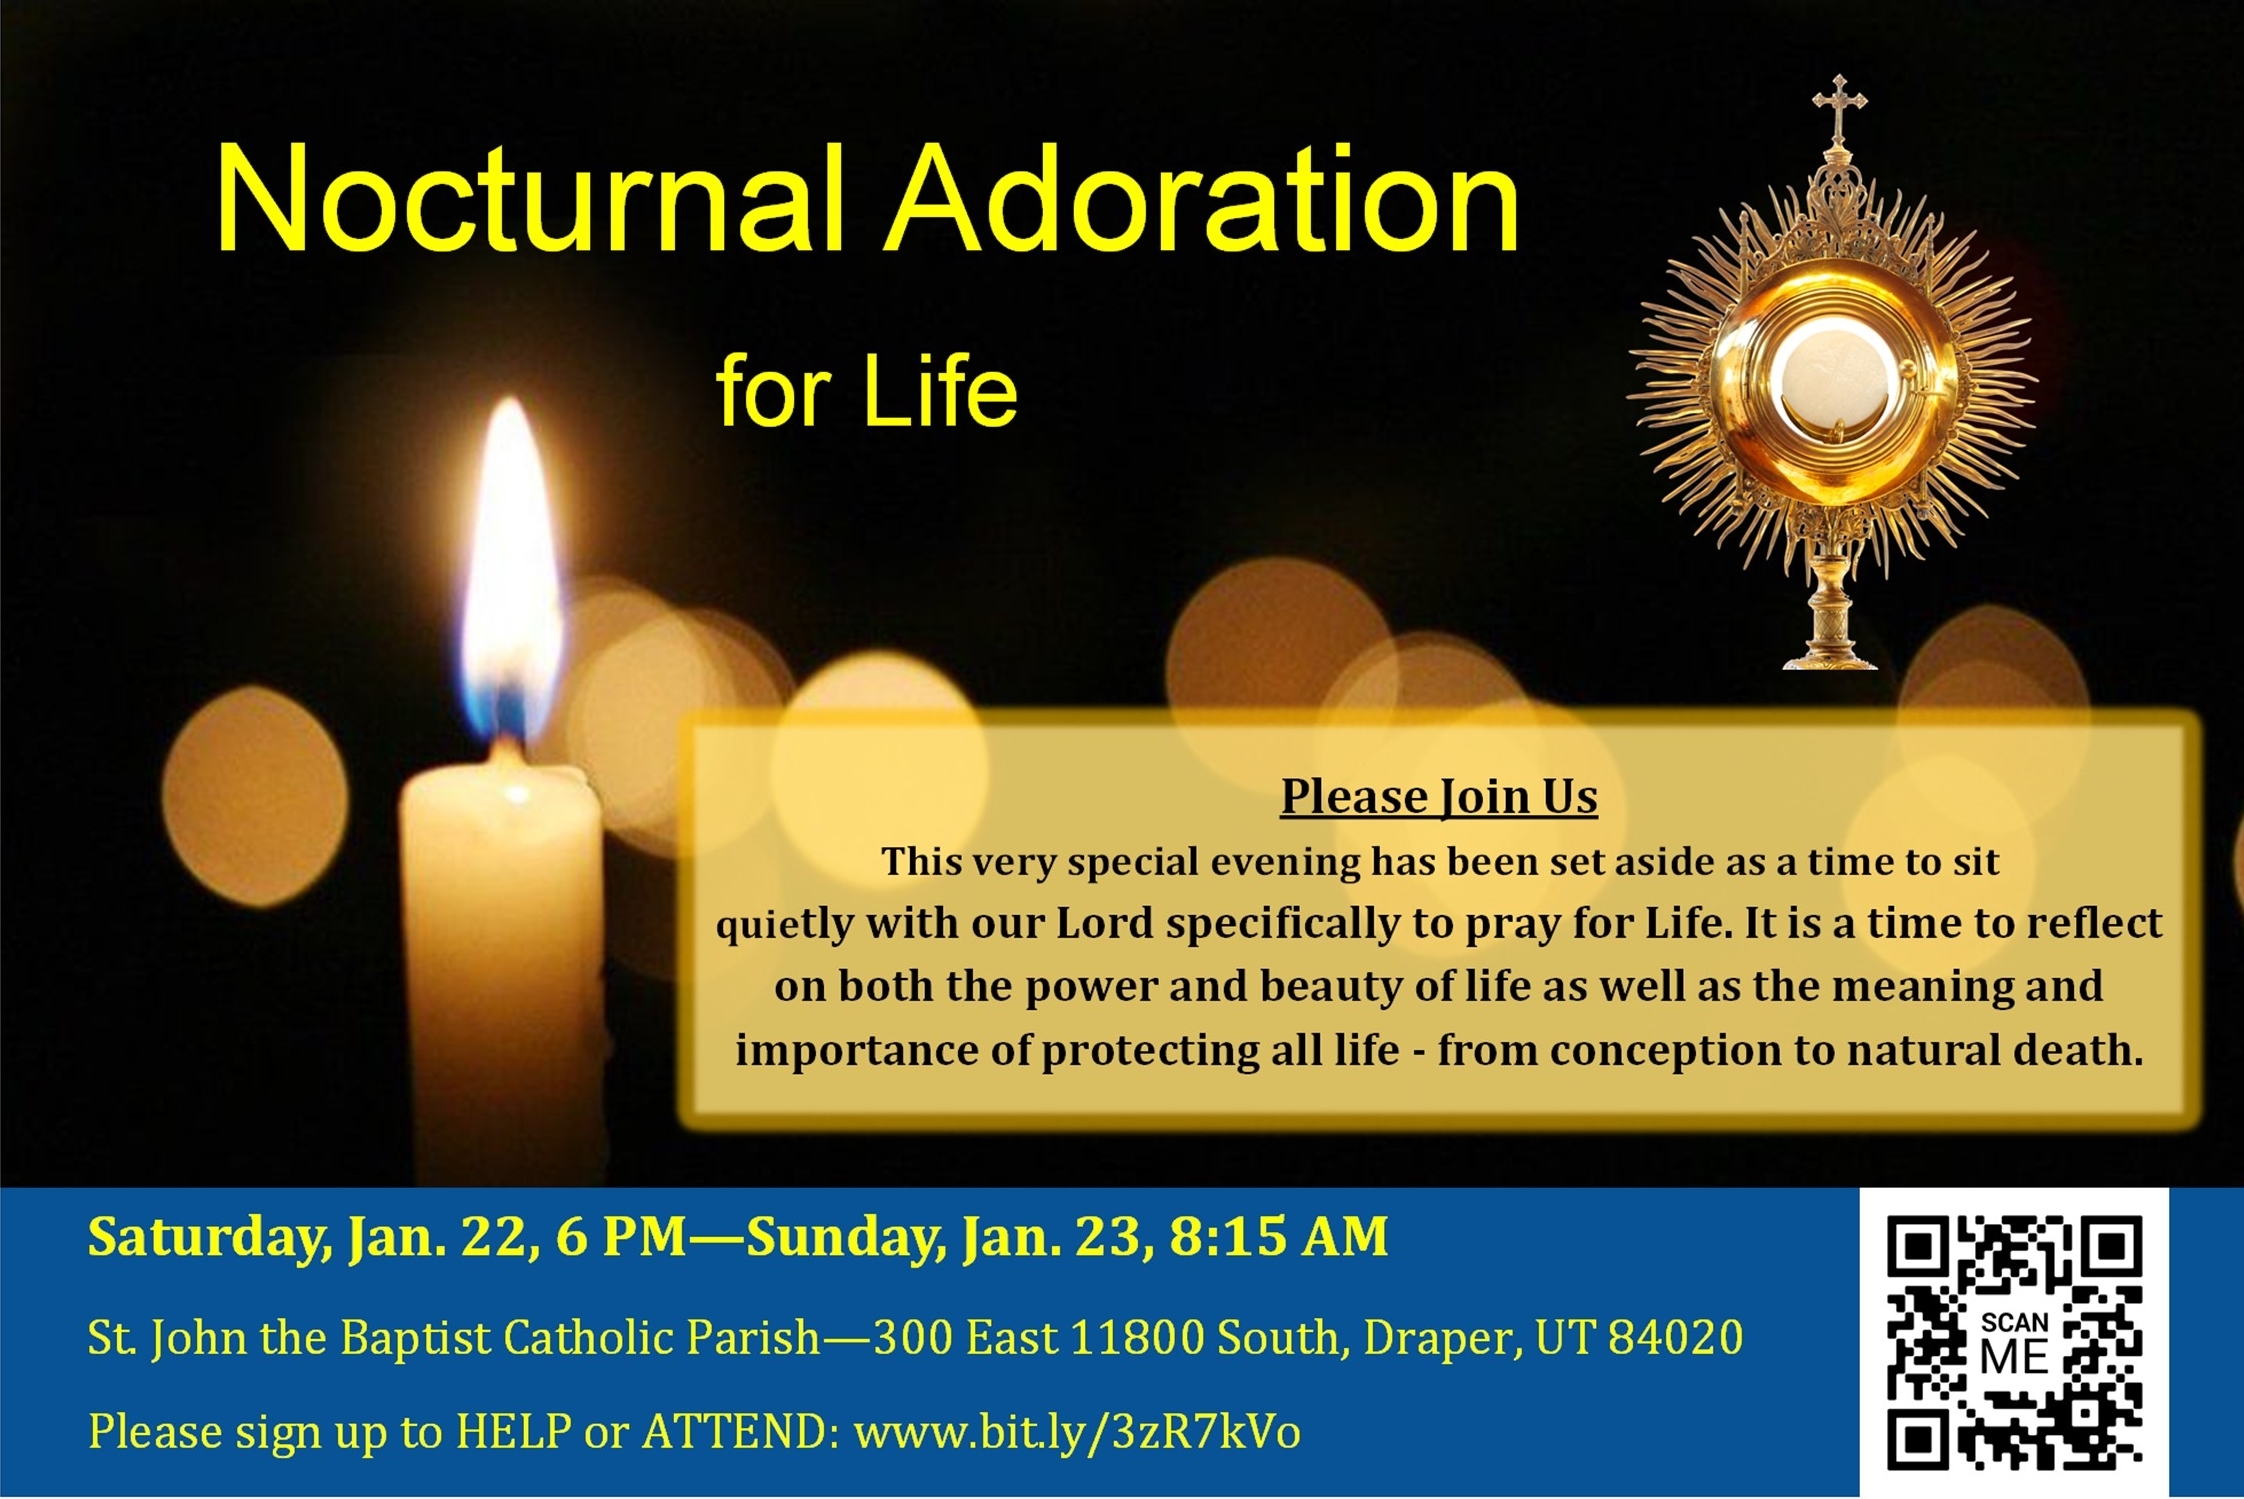 Nocturnal Adoration for Life